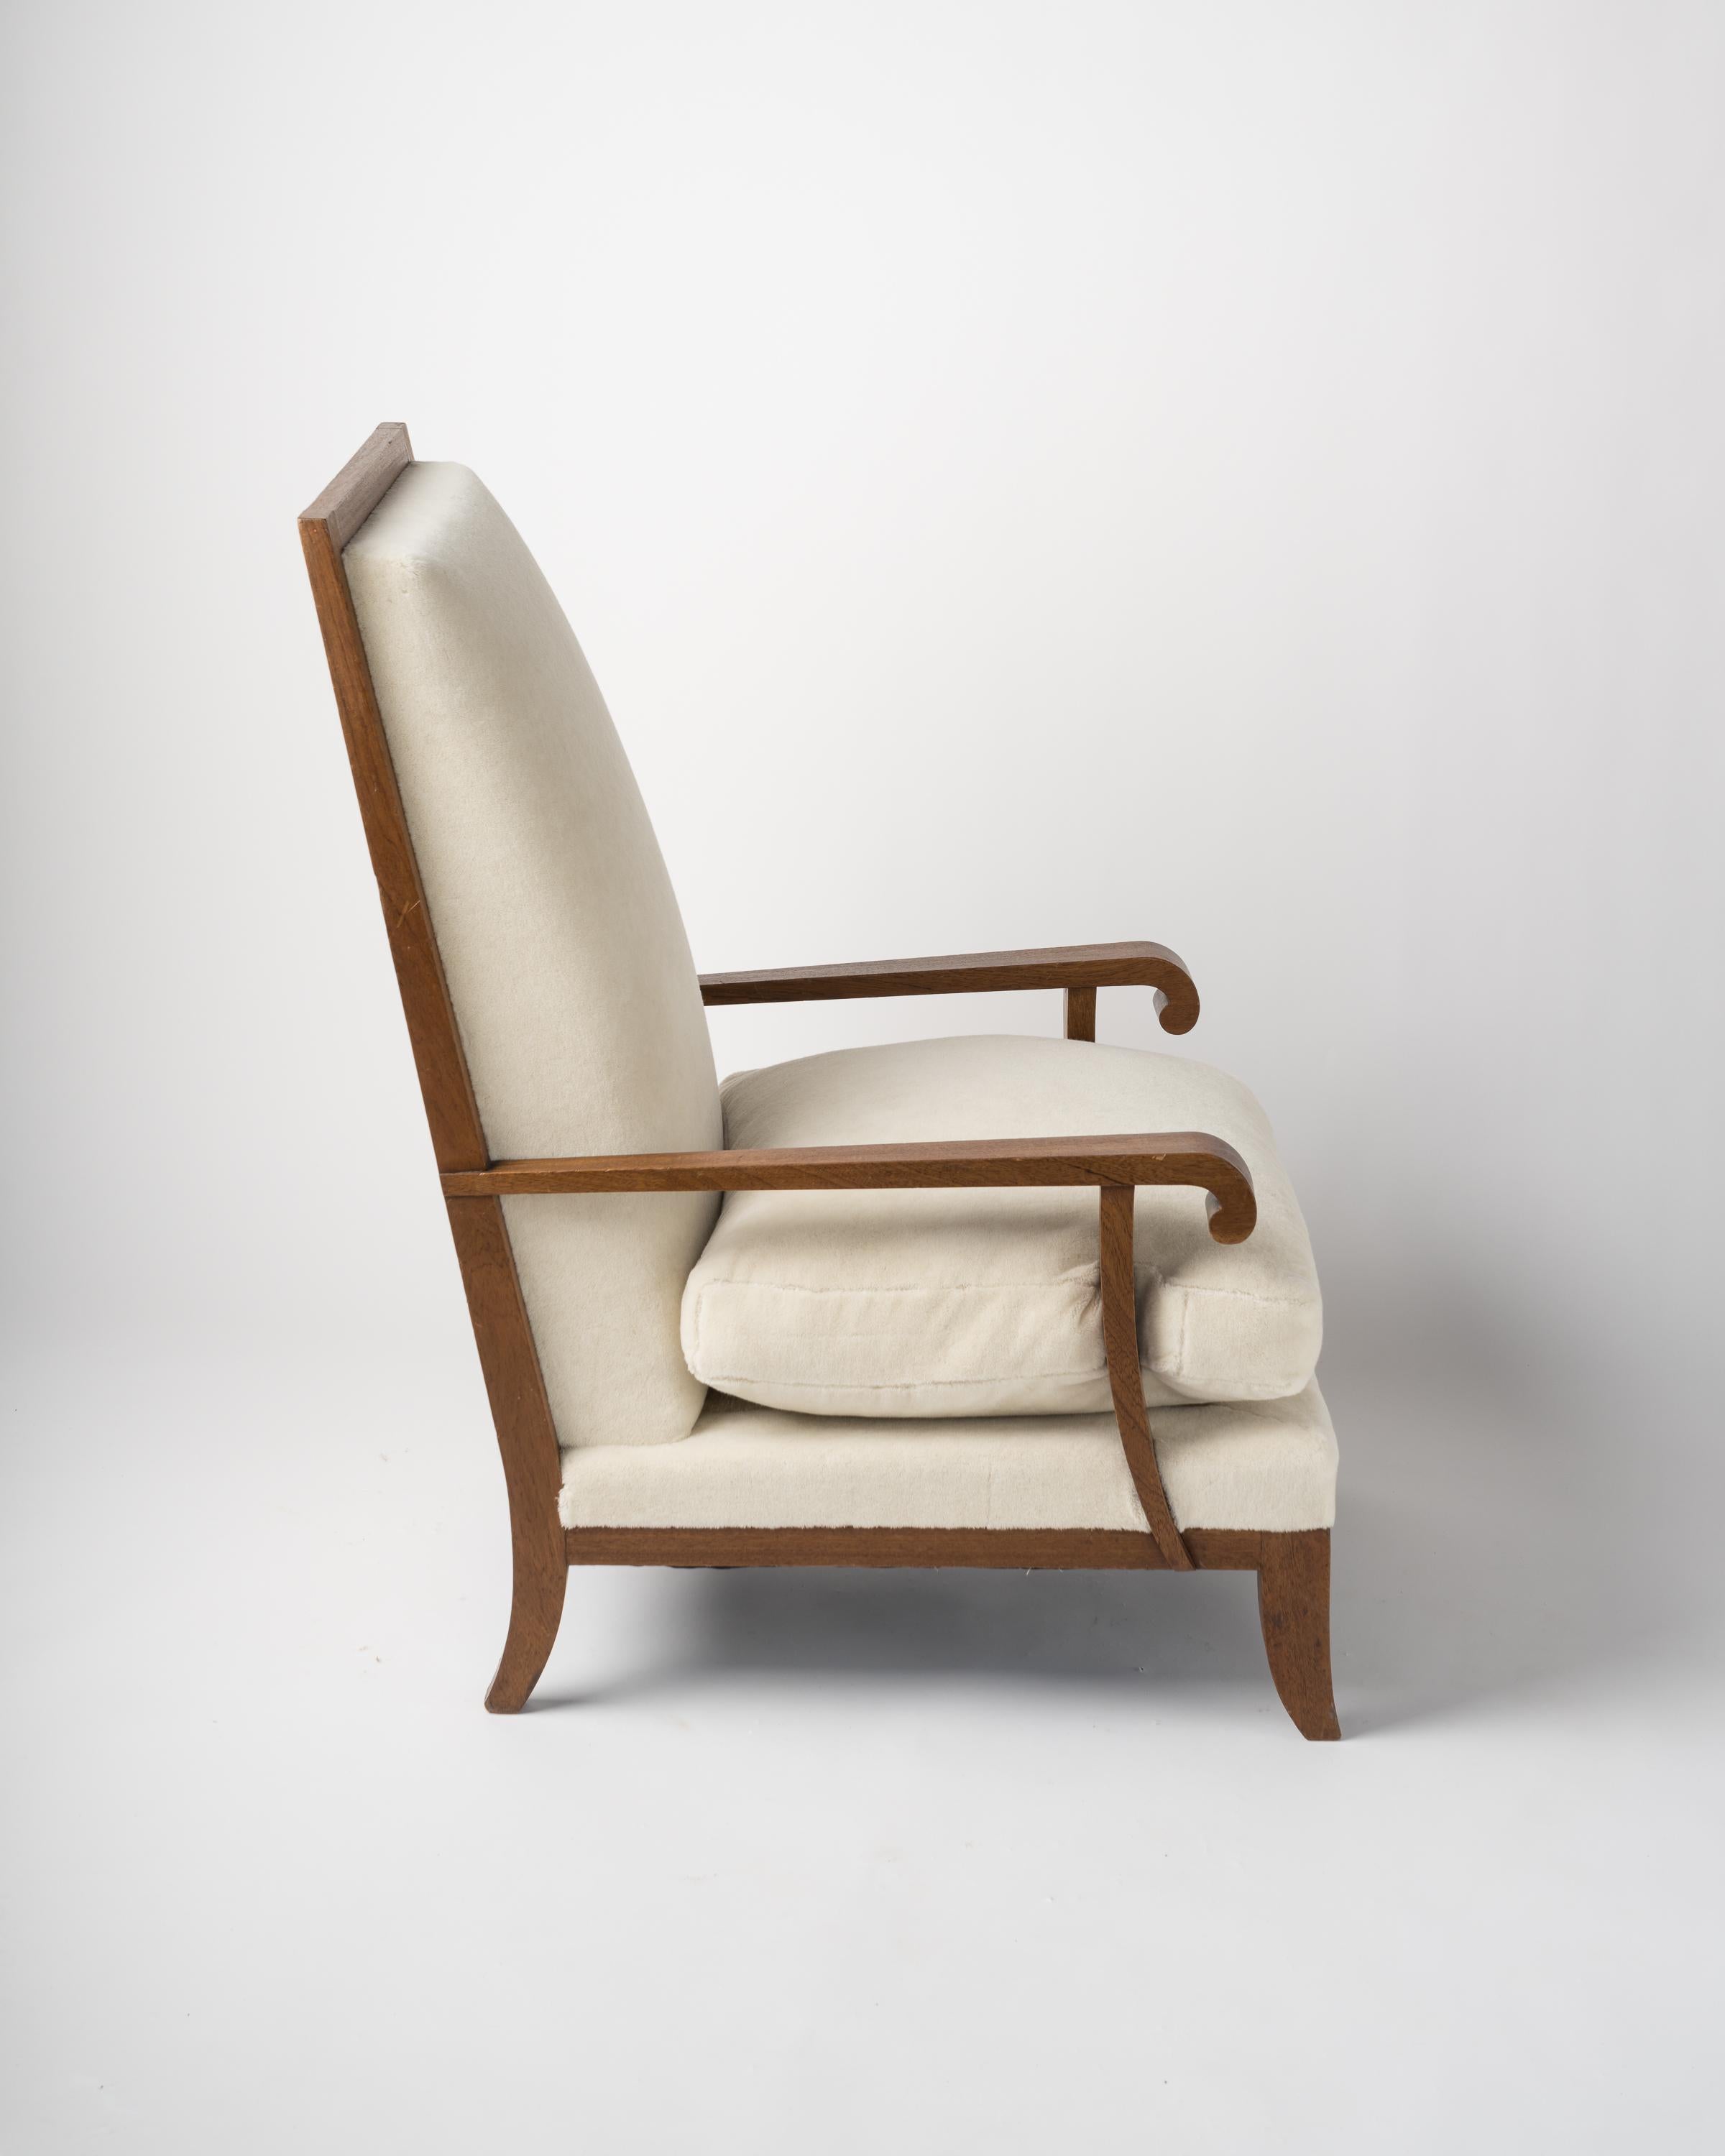 Solid oak high back armchair. Newly re-upholstered with Pierre Frey 